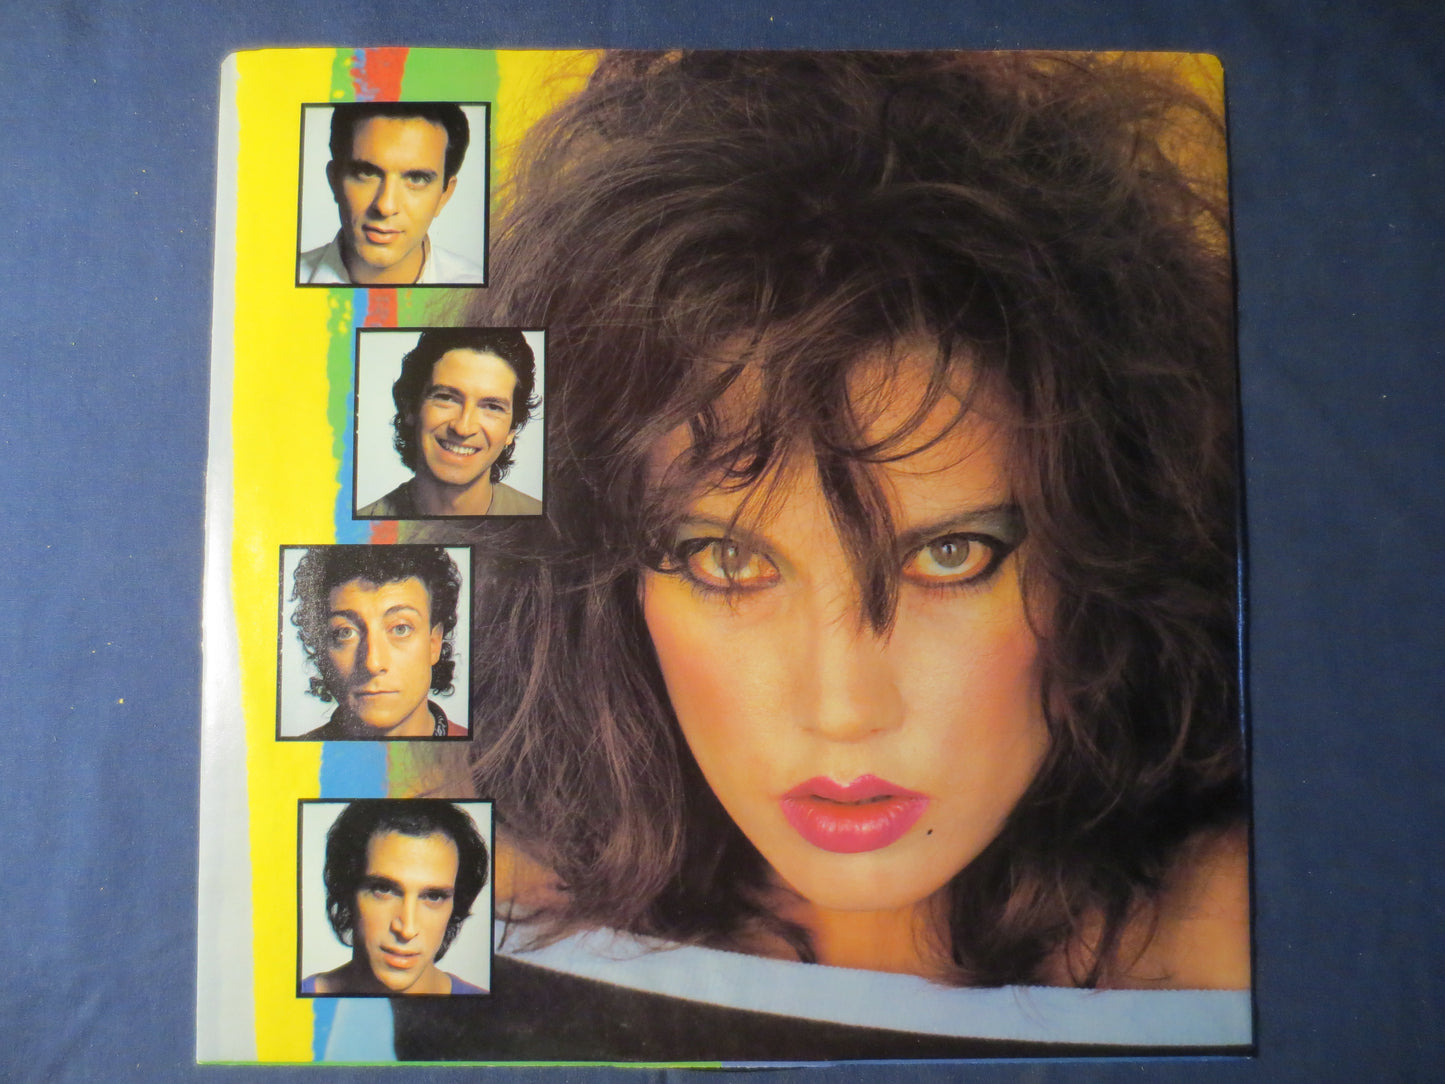 The MOTELS, All FOUR ONE, The Motels Album, The Motels Vinyl, The Motels Lp, Vintage Vinyl, Records, 1982 Records